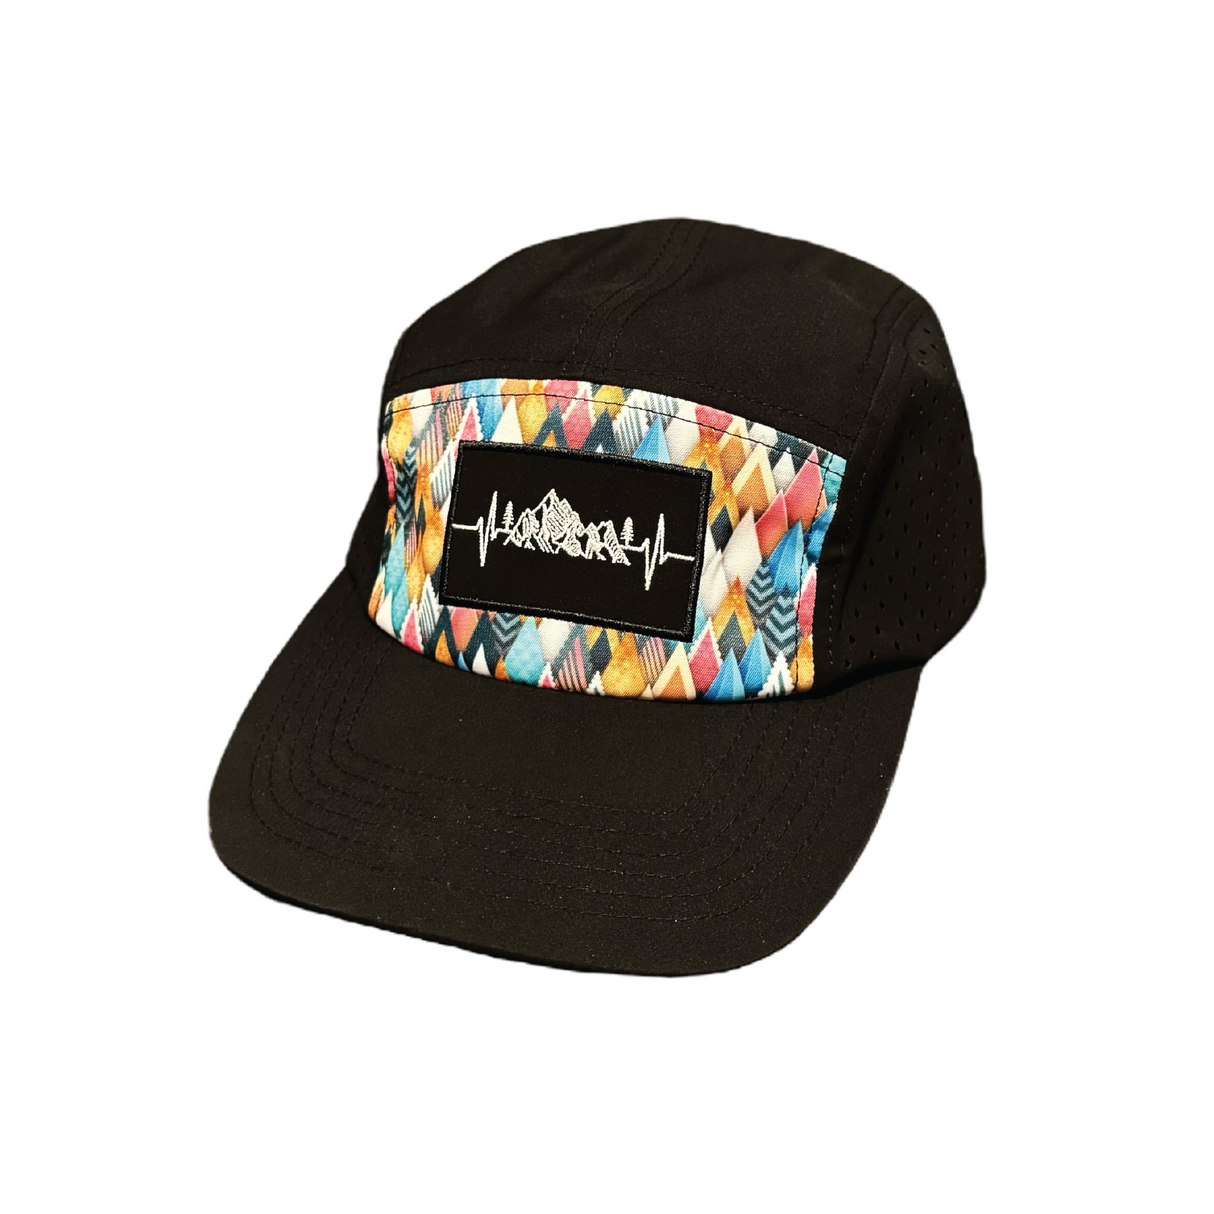 Mountains - Colored Peaks - 5 Panel - Sporty - Unstructured - Black